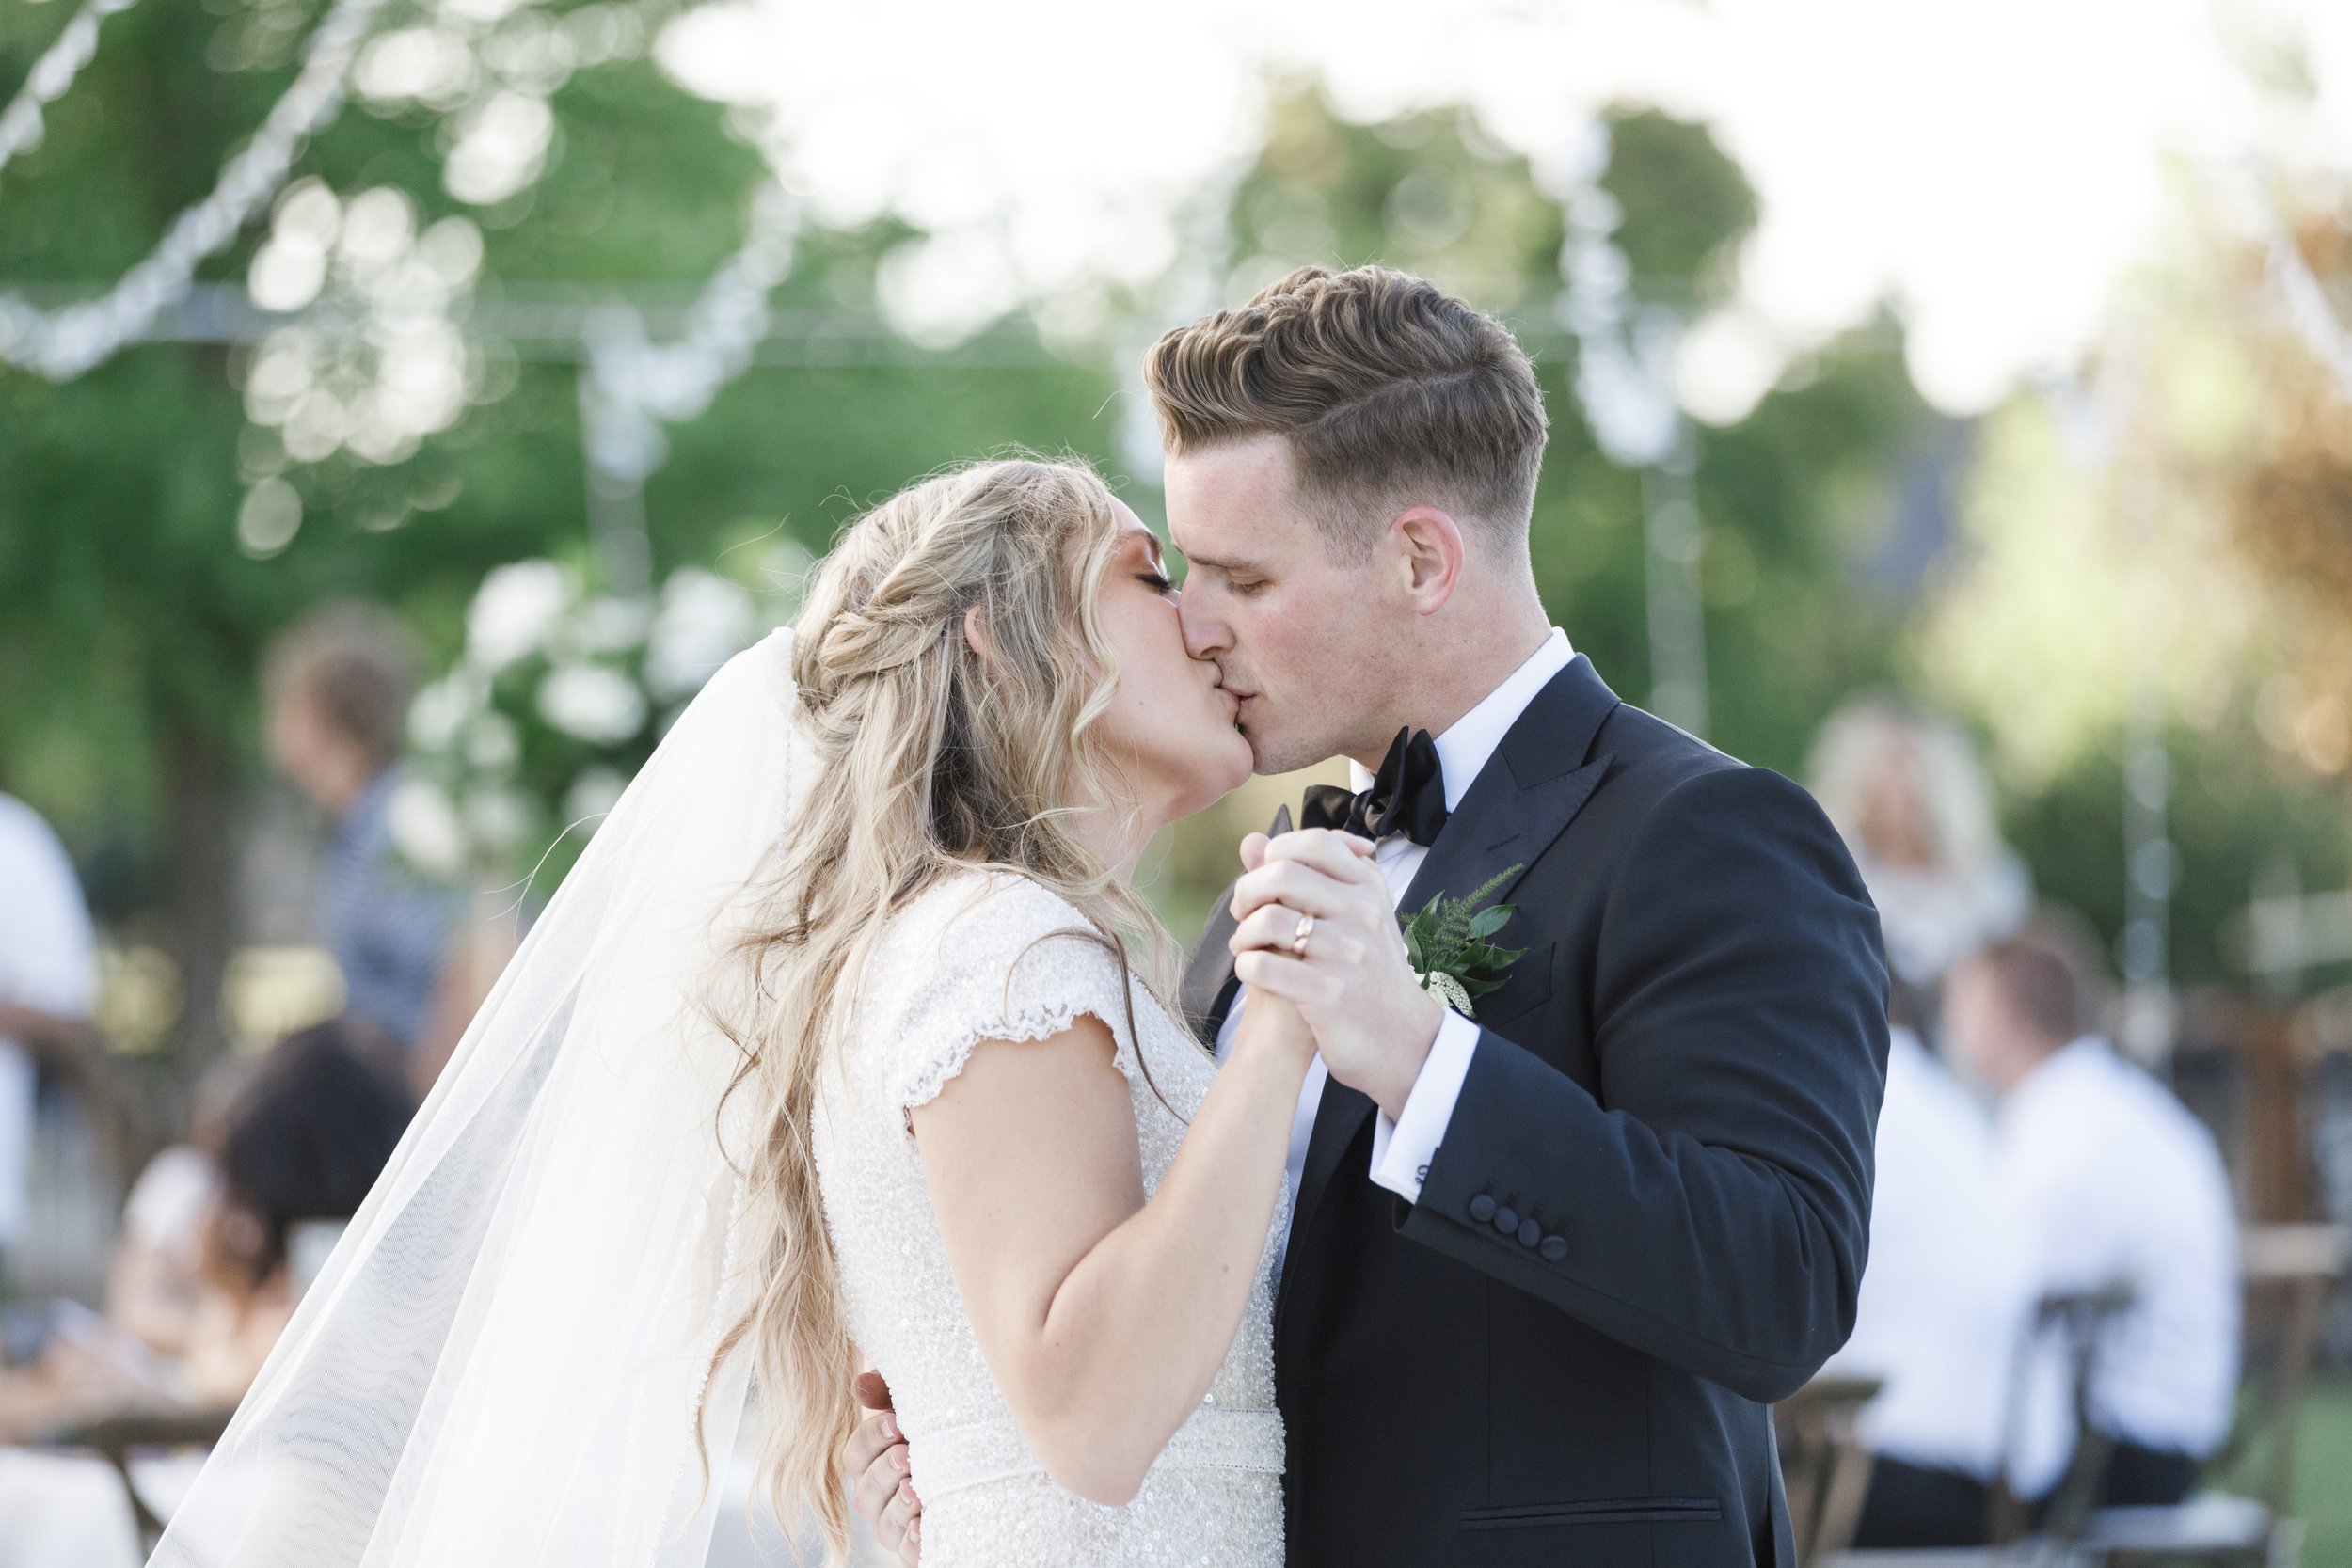  A bride and groom kiss during their first dance at their reception captured by Savanna Richardson Photography. first dance #SavannaRichardsonPhotography #SavannaRichardsonWeddings #bridals #formals #bouquets #Utahweddingphotographers #Wedding 